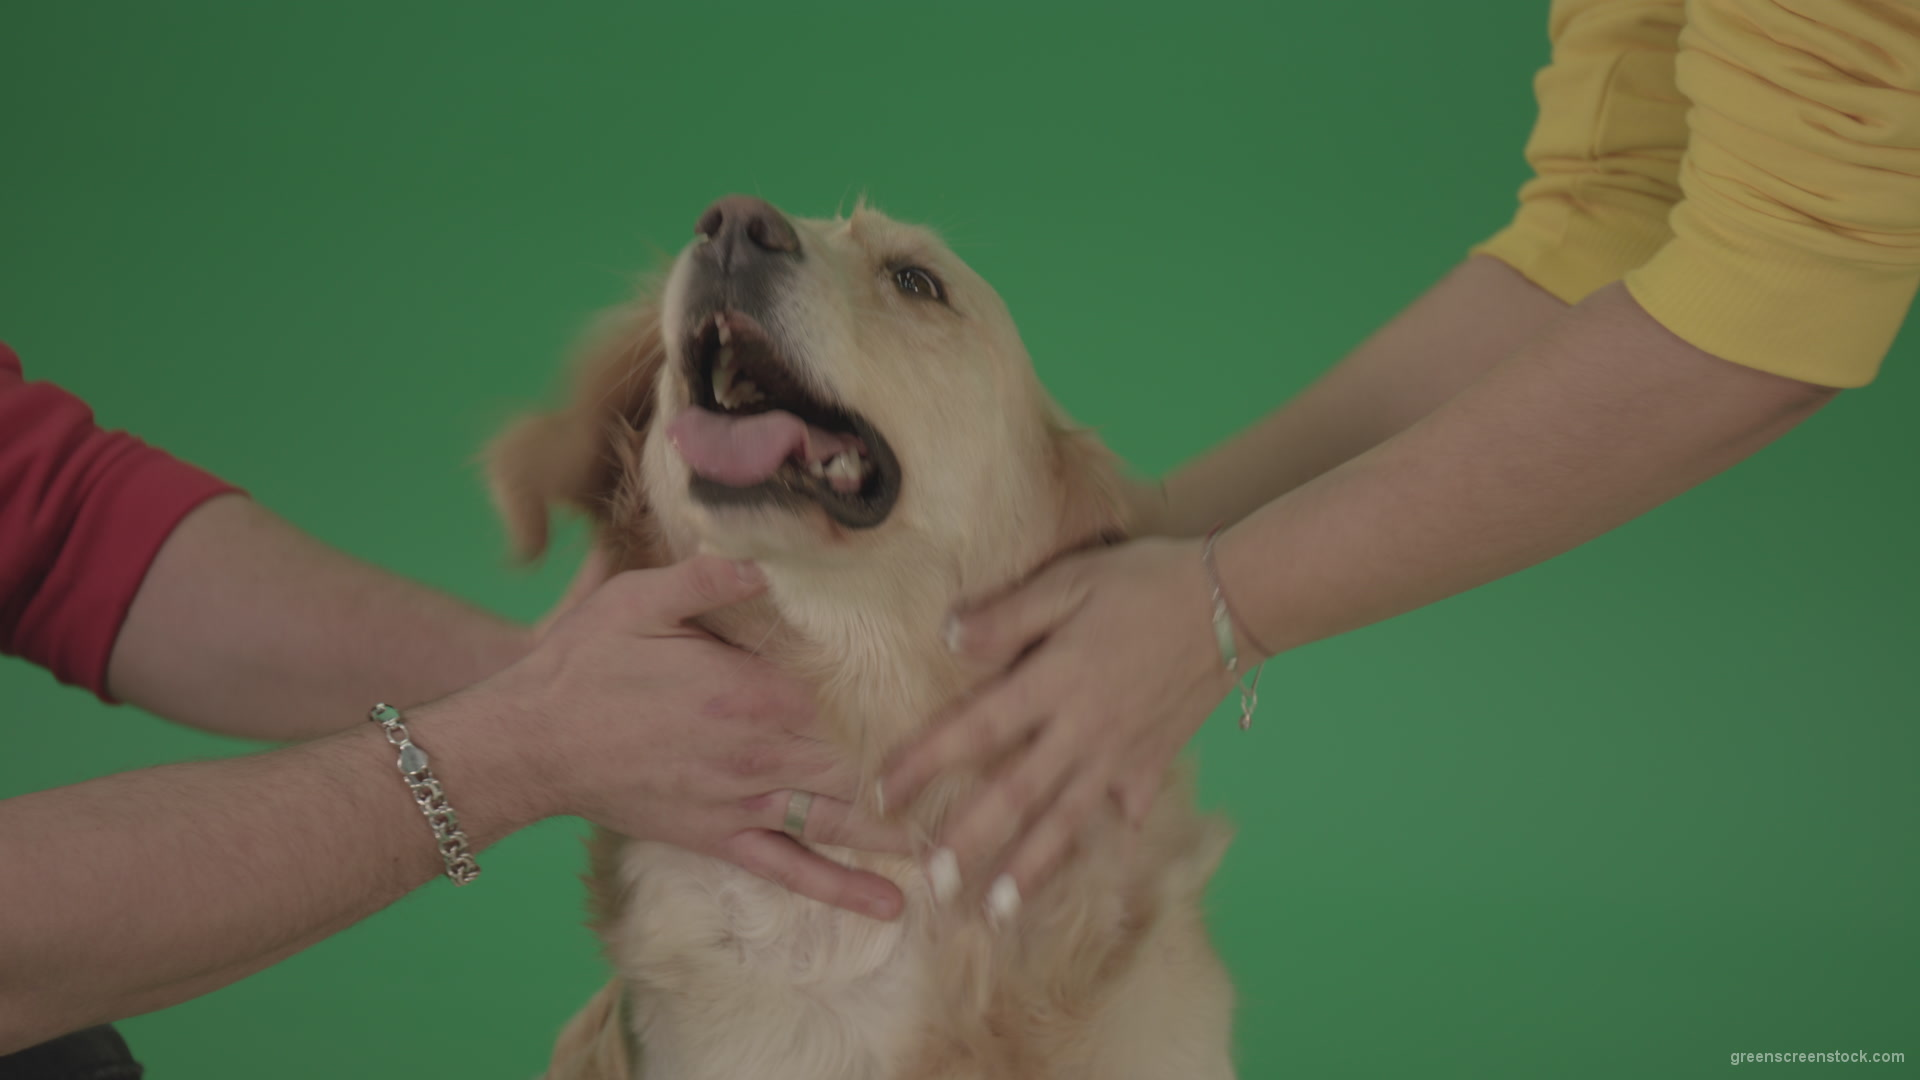 Funny-Golden-Retriever-owners-stroke-from-two-hands-hunter-Dog-isolated-on-green-screen-4K-video-footage_008 Green Screen Stock